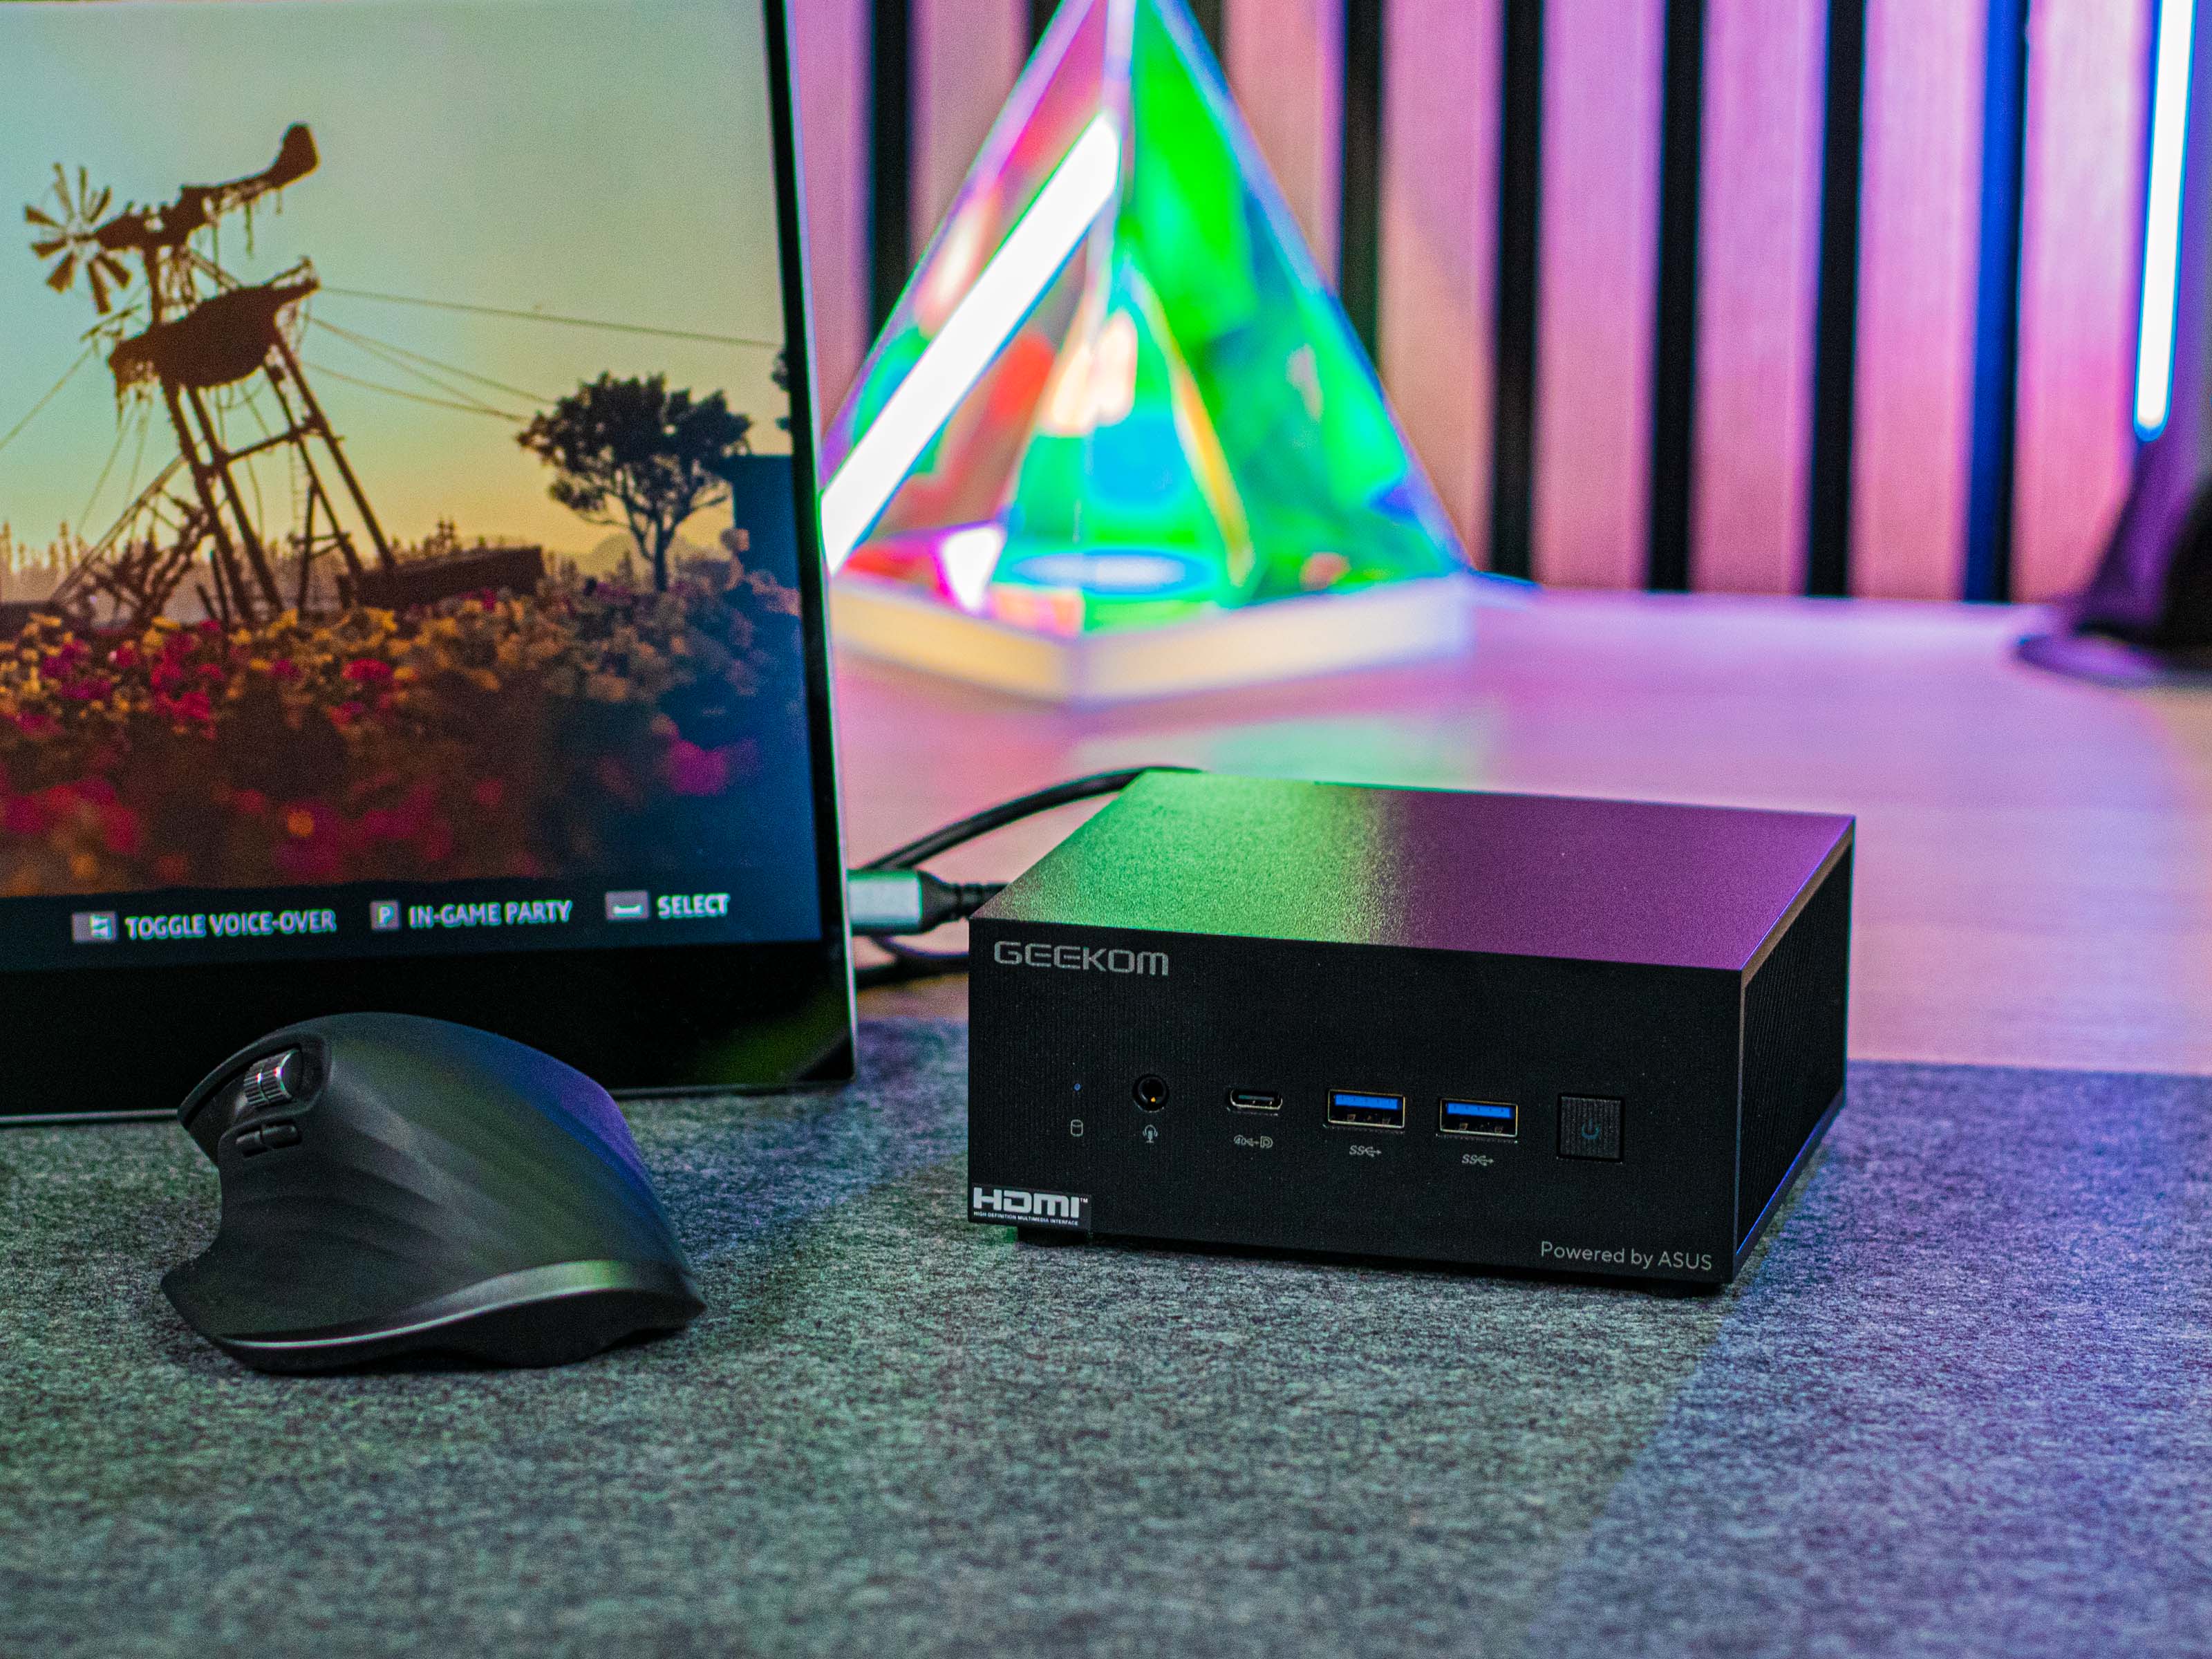 Mini PCs Have Come A LONG Way - GEEKOM AS 6 Review 